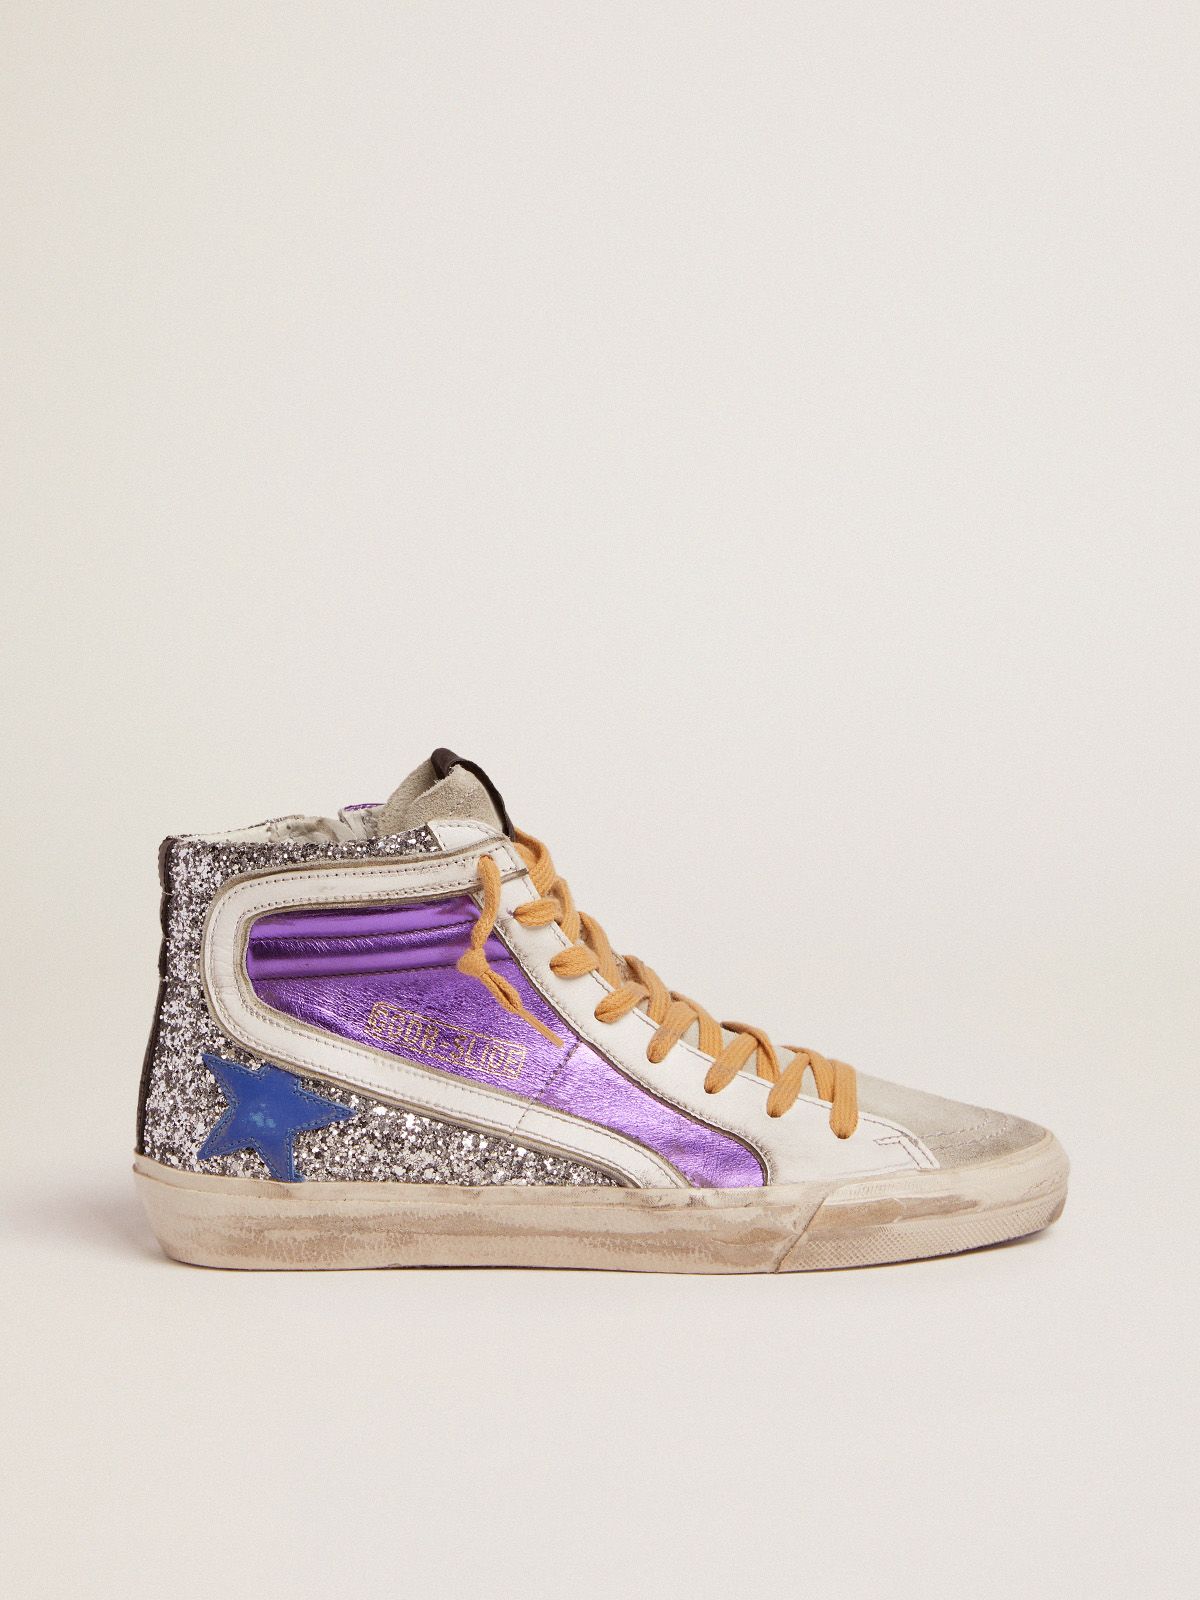 Golden Goose Bambina Slide sneakers with silver glitter and purple laminated leather upper